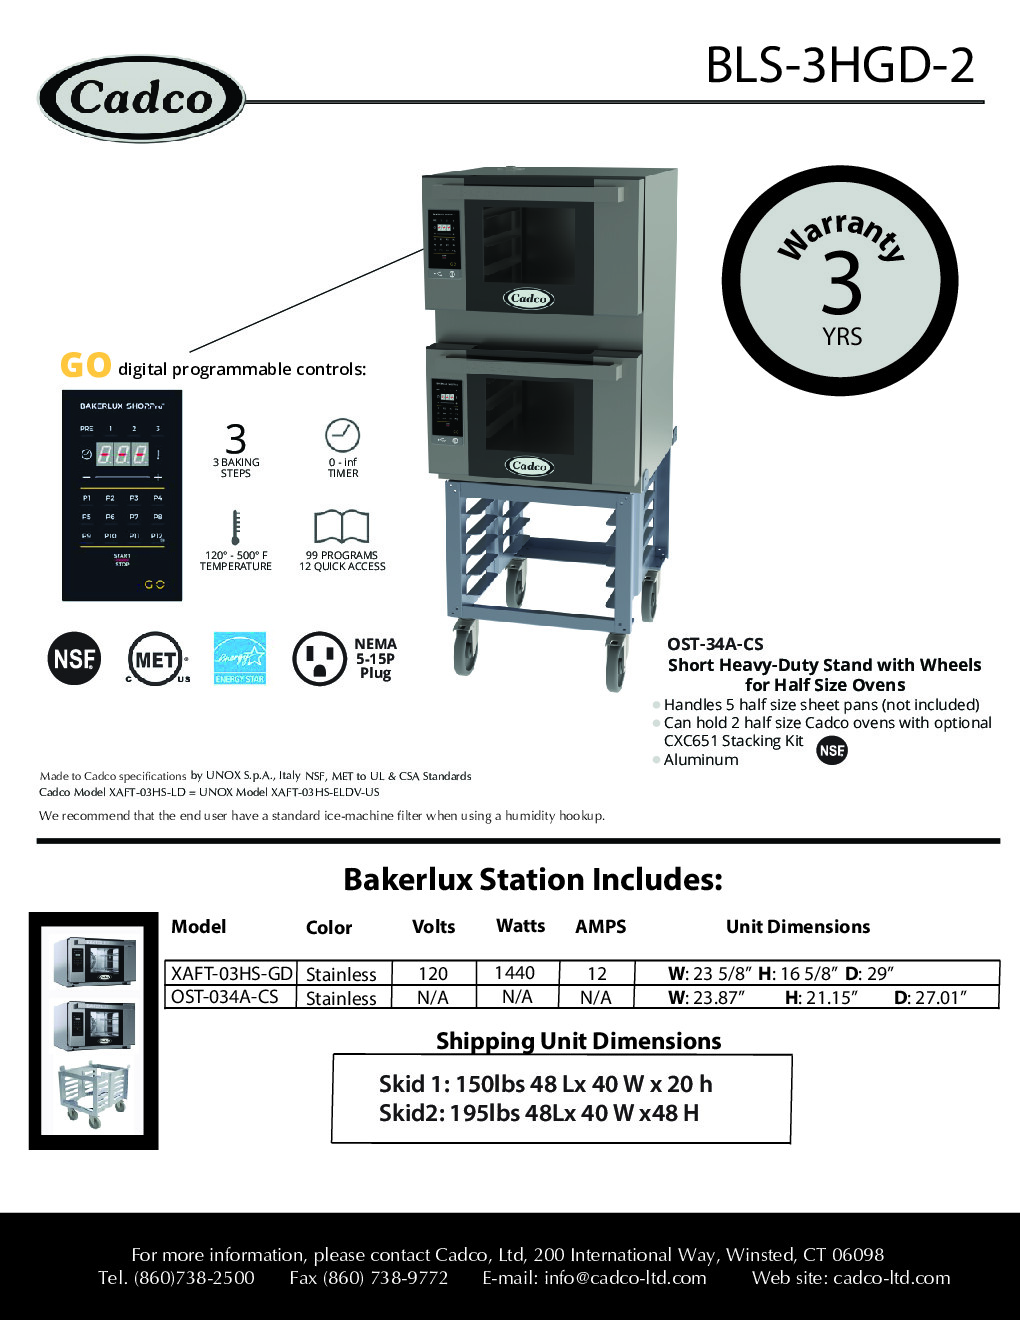 Cadco BLS-3HGD-2 Double-Deck Electric Convection Oven w/ Digital Touch Controls, Half-Size